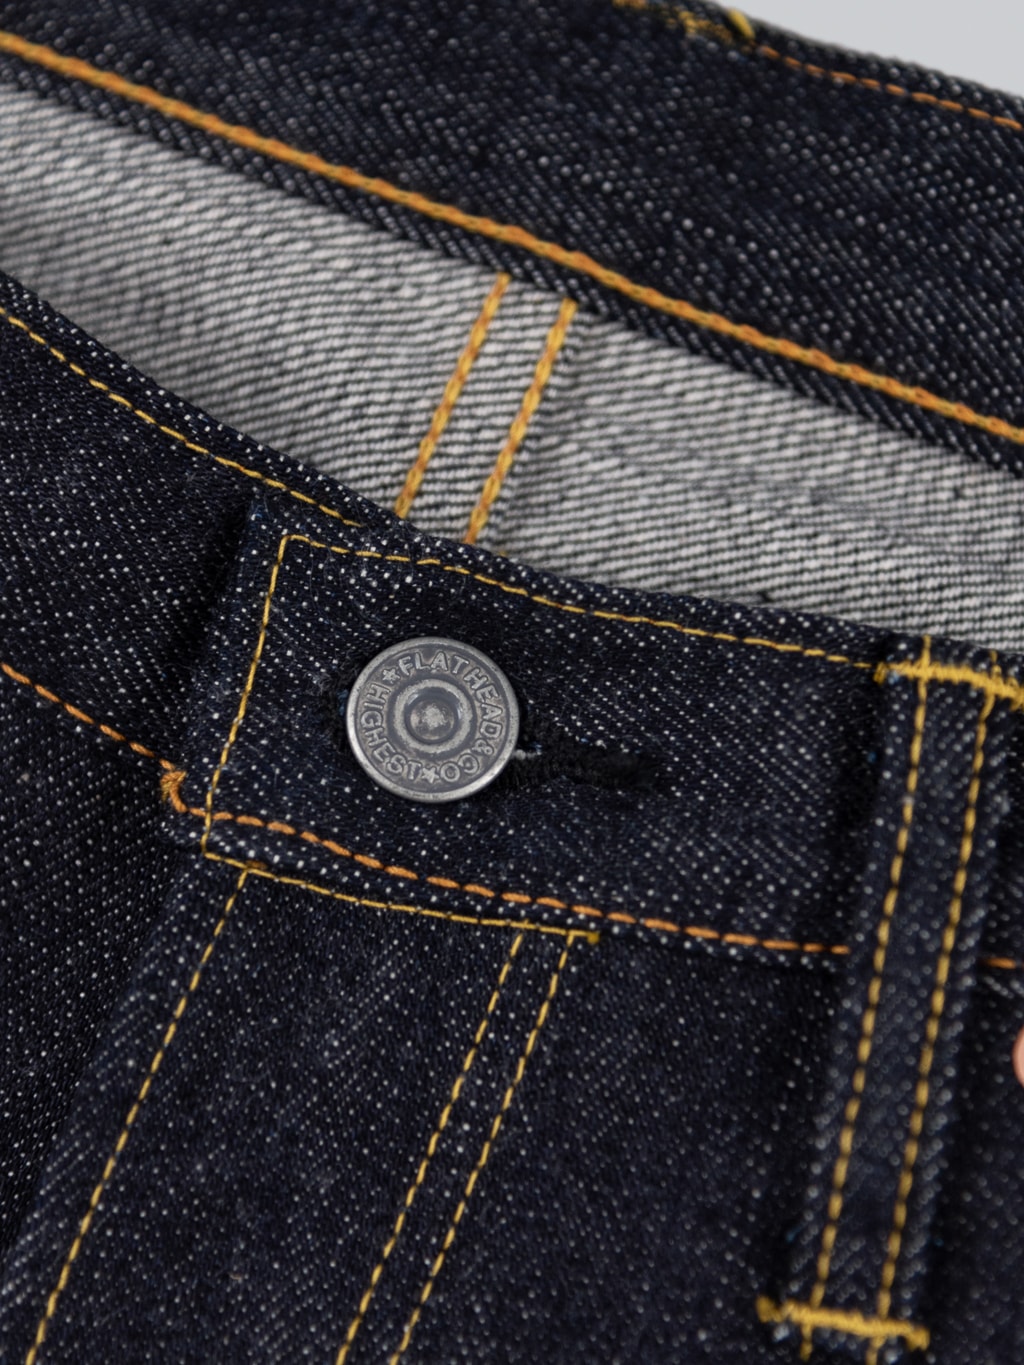 The Flat Head 3002 14.5oz Slim Tapered selvedge Jeans iron button